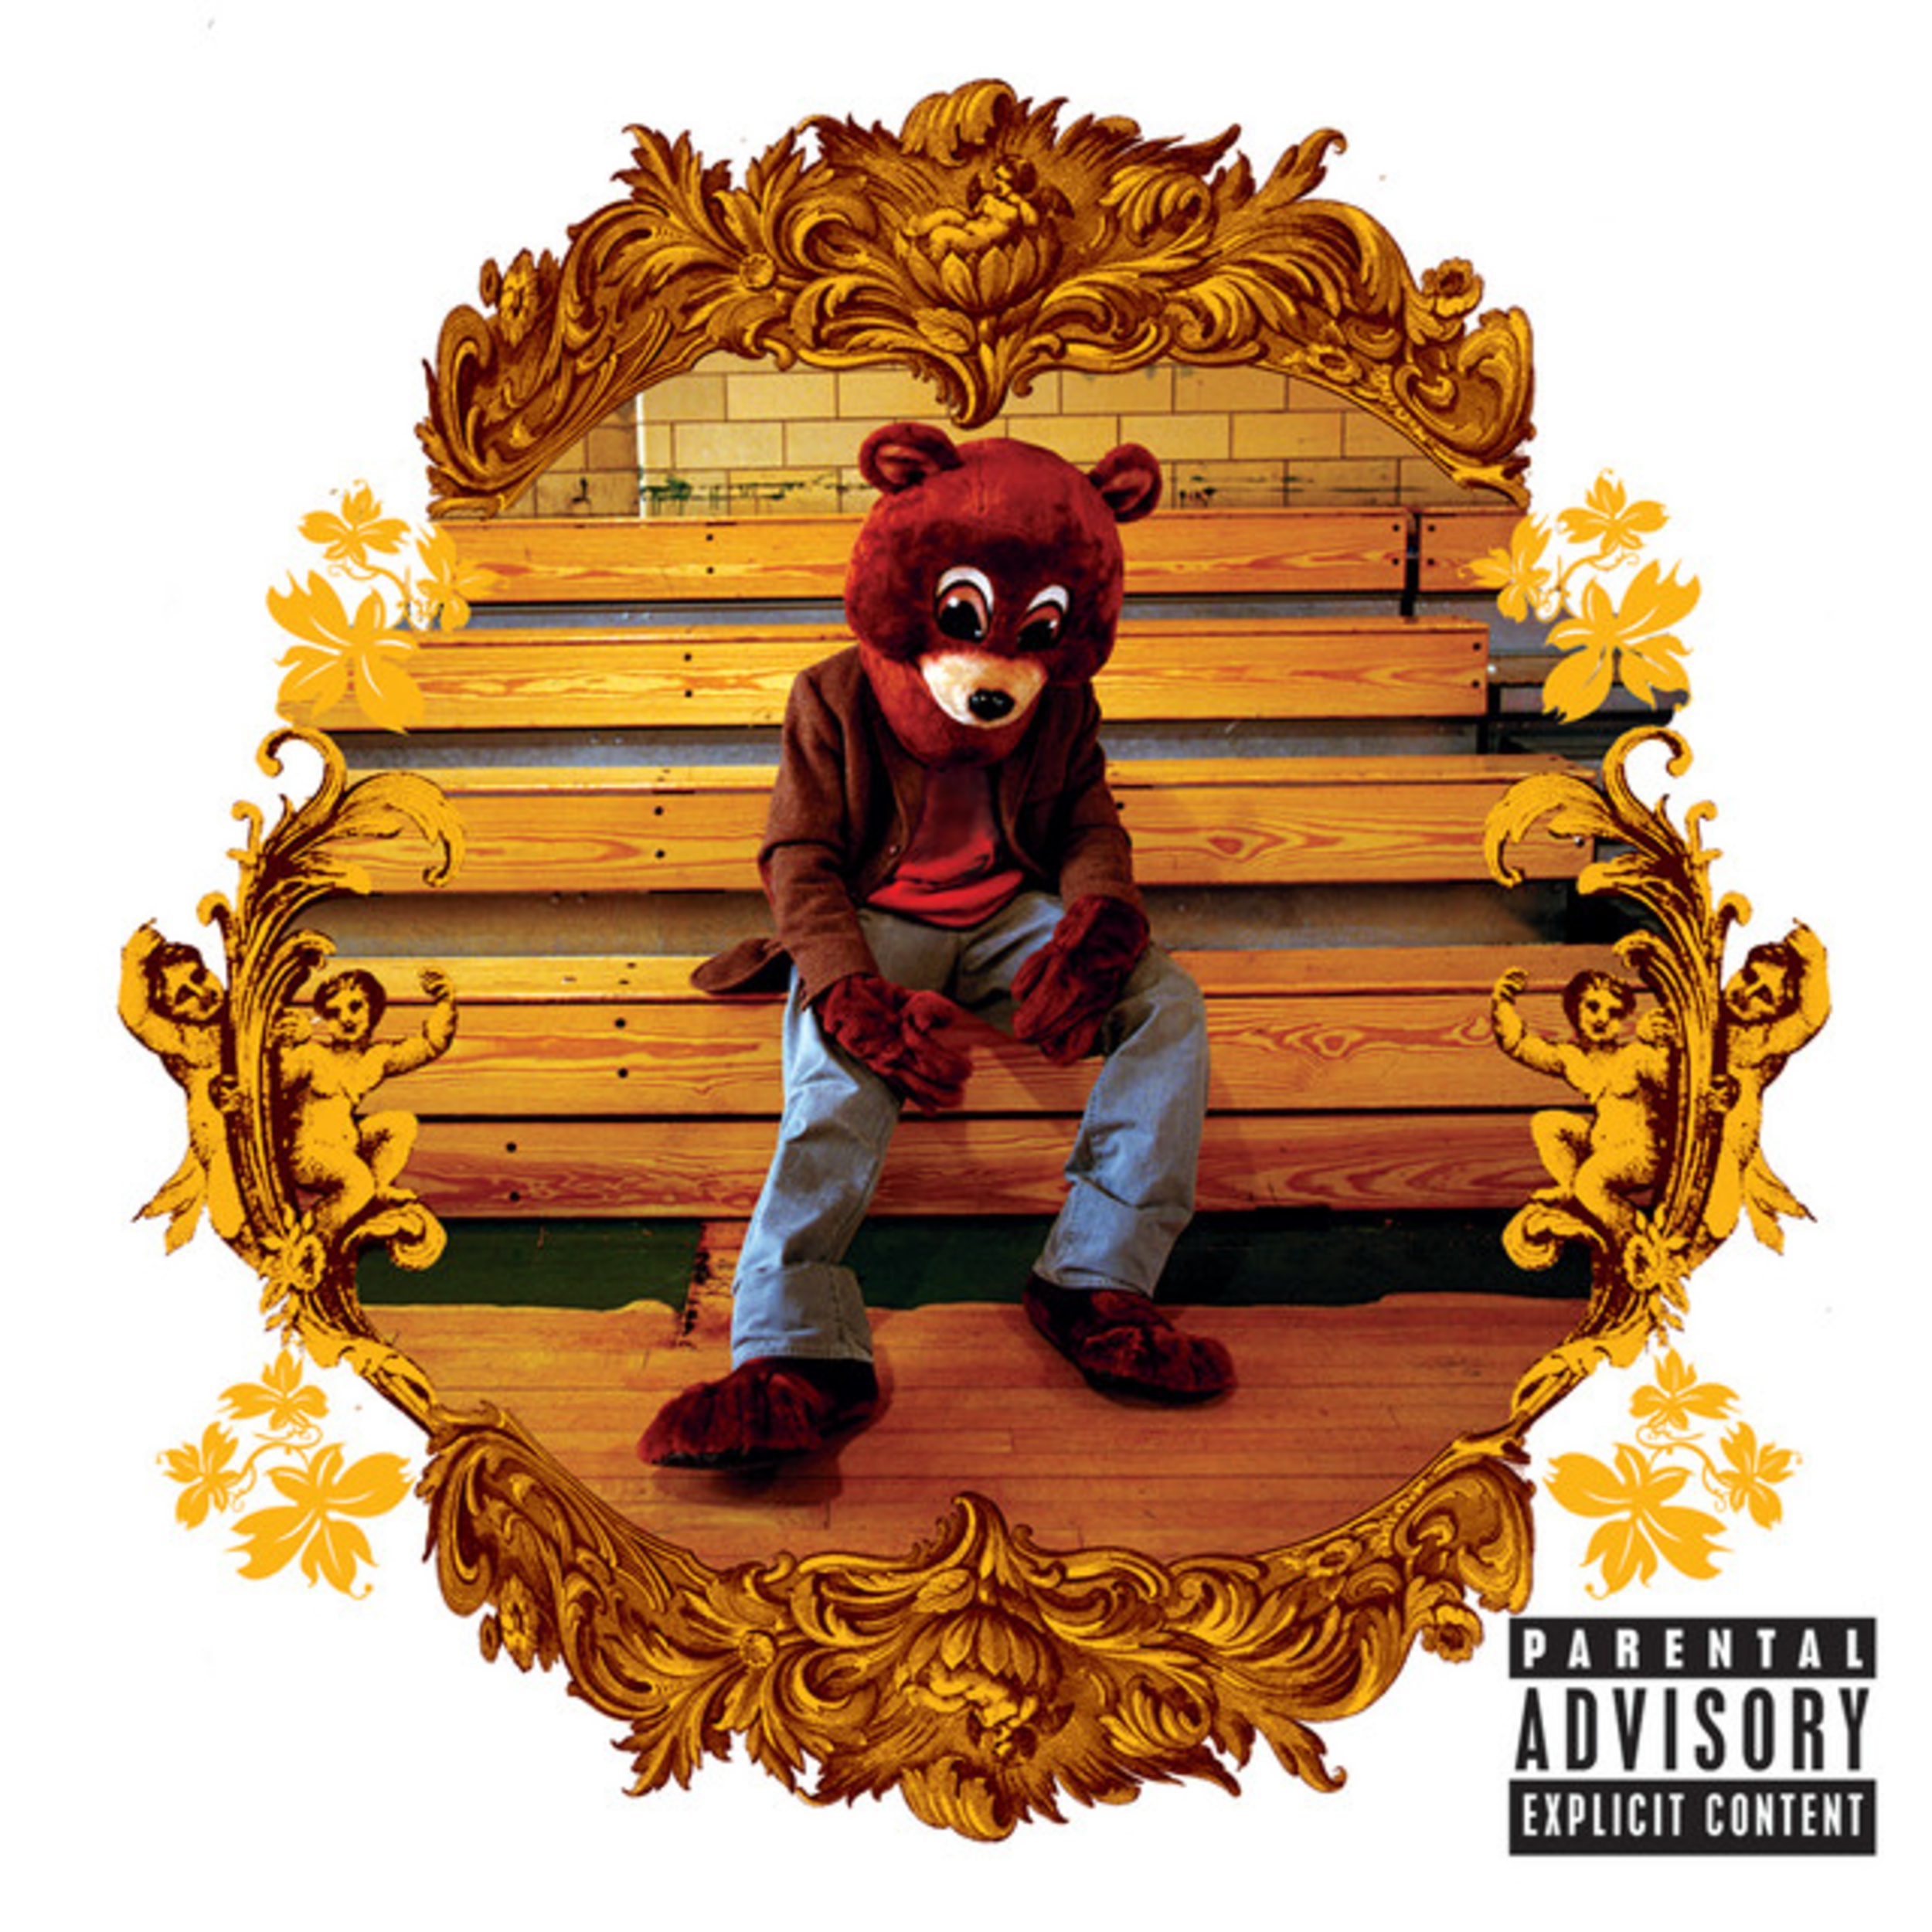 <p>Early in Kanye West's career, he was known for producing songs for rappers like Talib Kweli and Jay-Z, but he was ready to showcase to the world he was more than just a producer. West introduced himself as a rapper with his debut album, <em>The College Dropout.</em> It helped to jumpstart his career as the next big thing in hip-hop with hit tracks like <a href="https://www.youtube.com/watch?v=AE8y25CcE6s">"Through the Wire,"</a> "All Falls Down," and "Jesus Walks." </p><p>You may also like: <a href='https://www.yardbarker.com/entertainment/articles/the_essential_eric_clapton_playlist_012224/s1__31655945'>The essential Eric Clapton playlist</a></p>